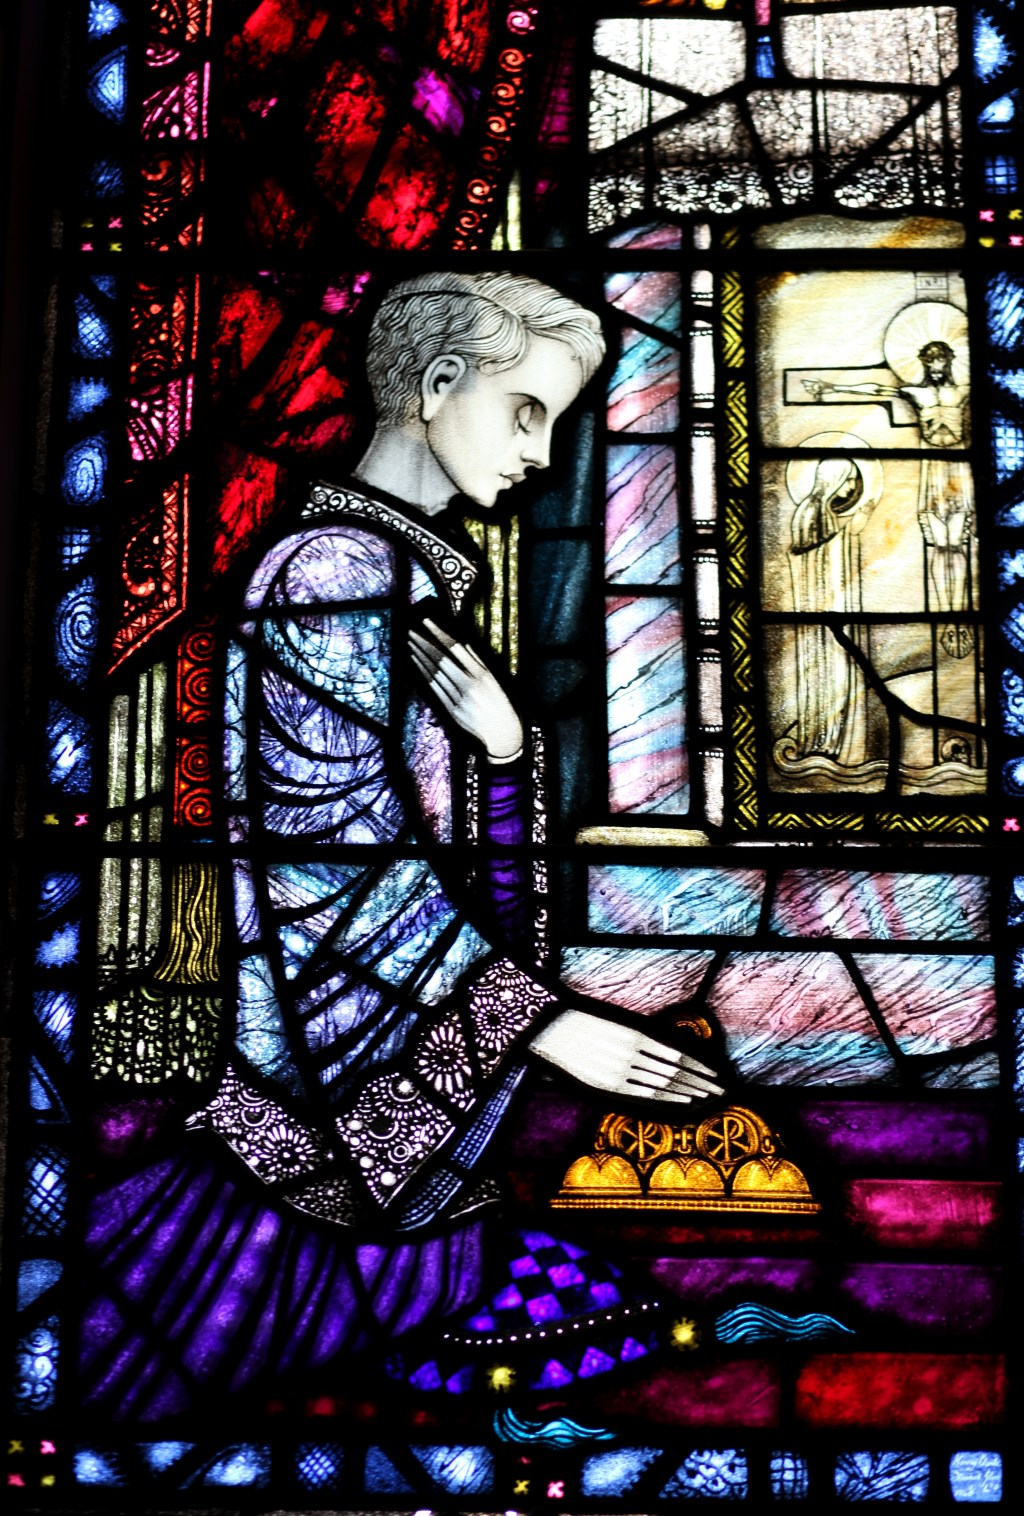 Altar boy depicted in stained glass